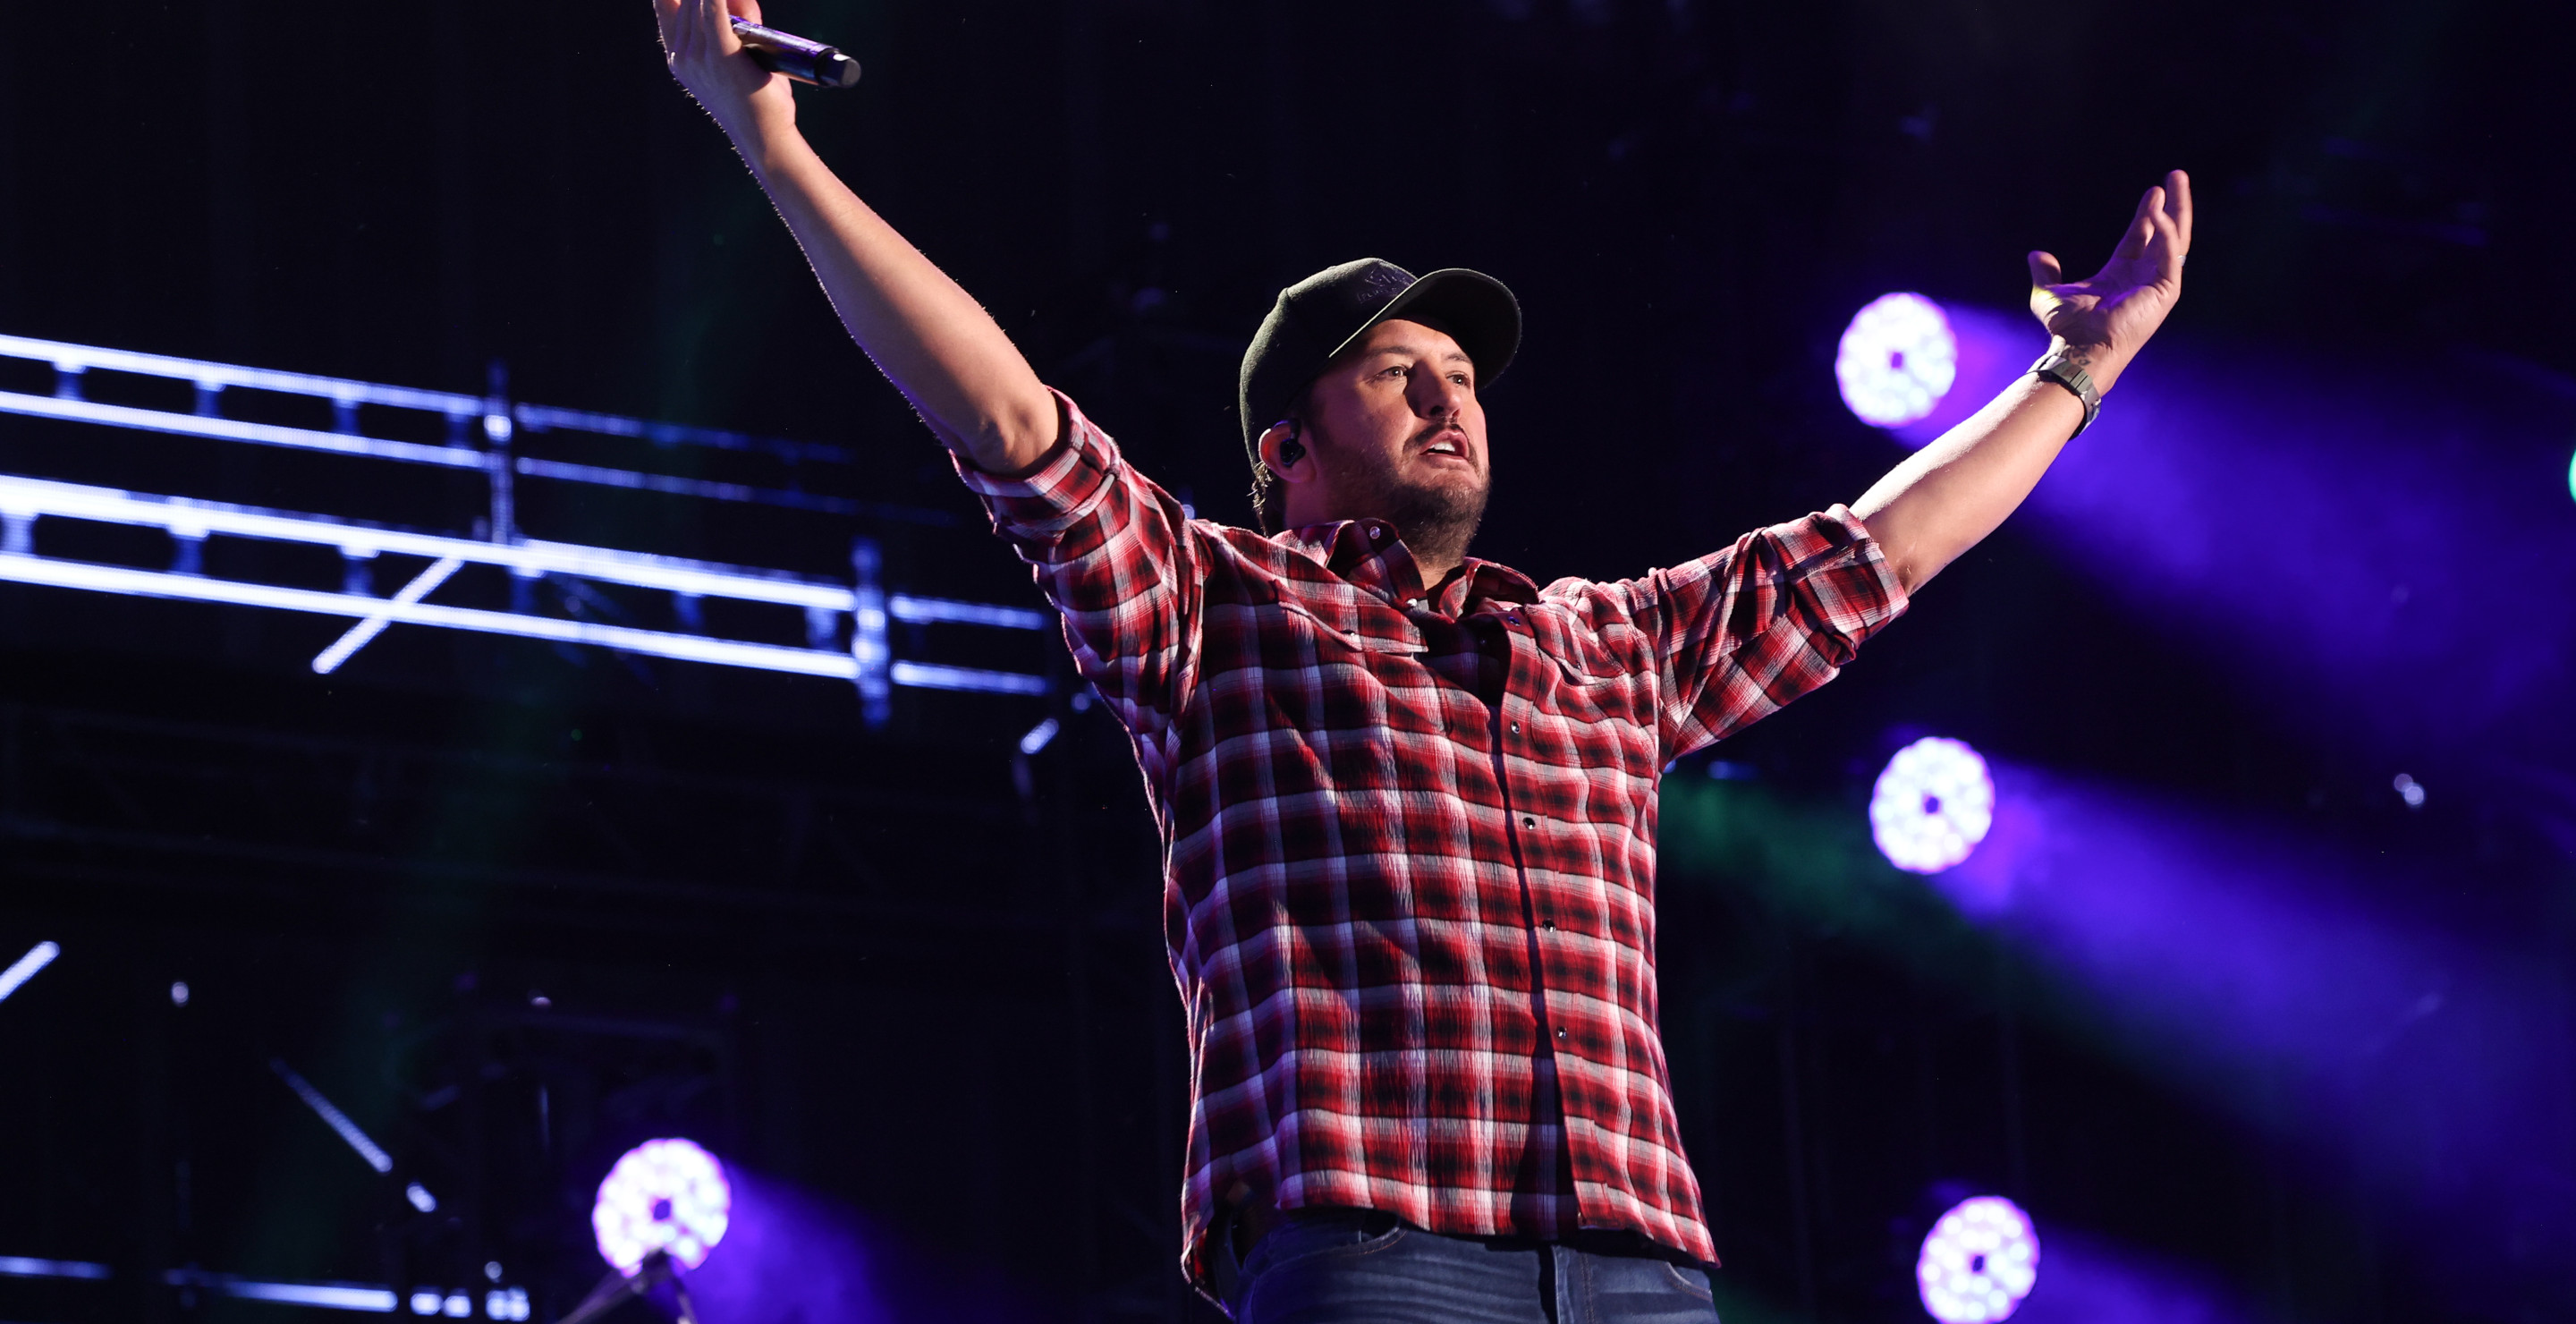 Luke Bryan's Bar Cleared Of Any Wrongdoing In Riley Strain Case